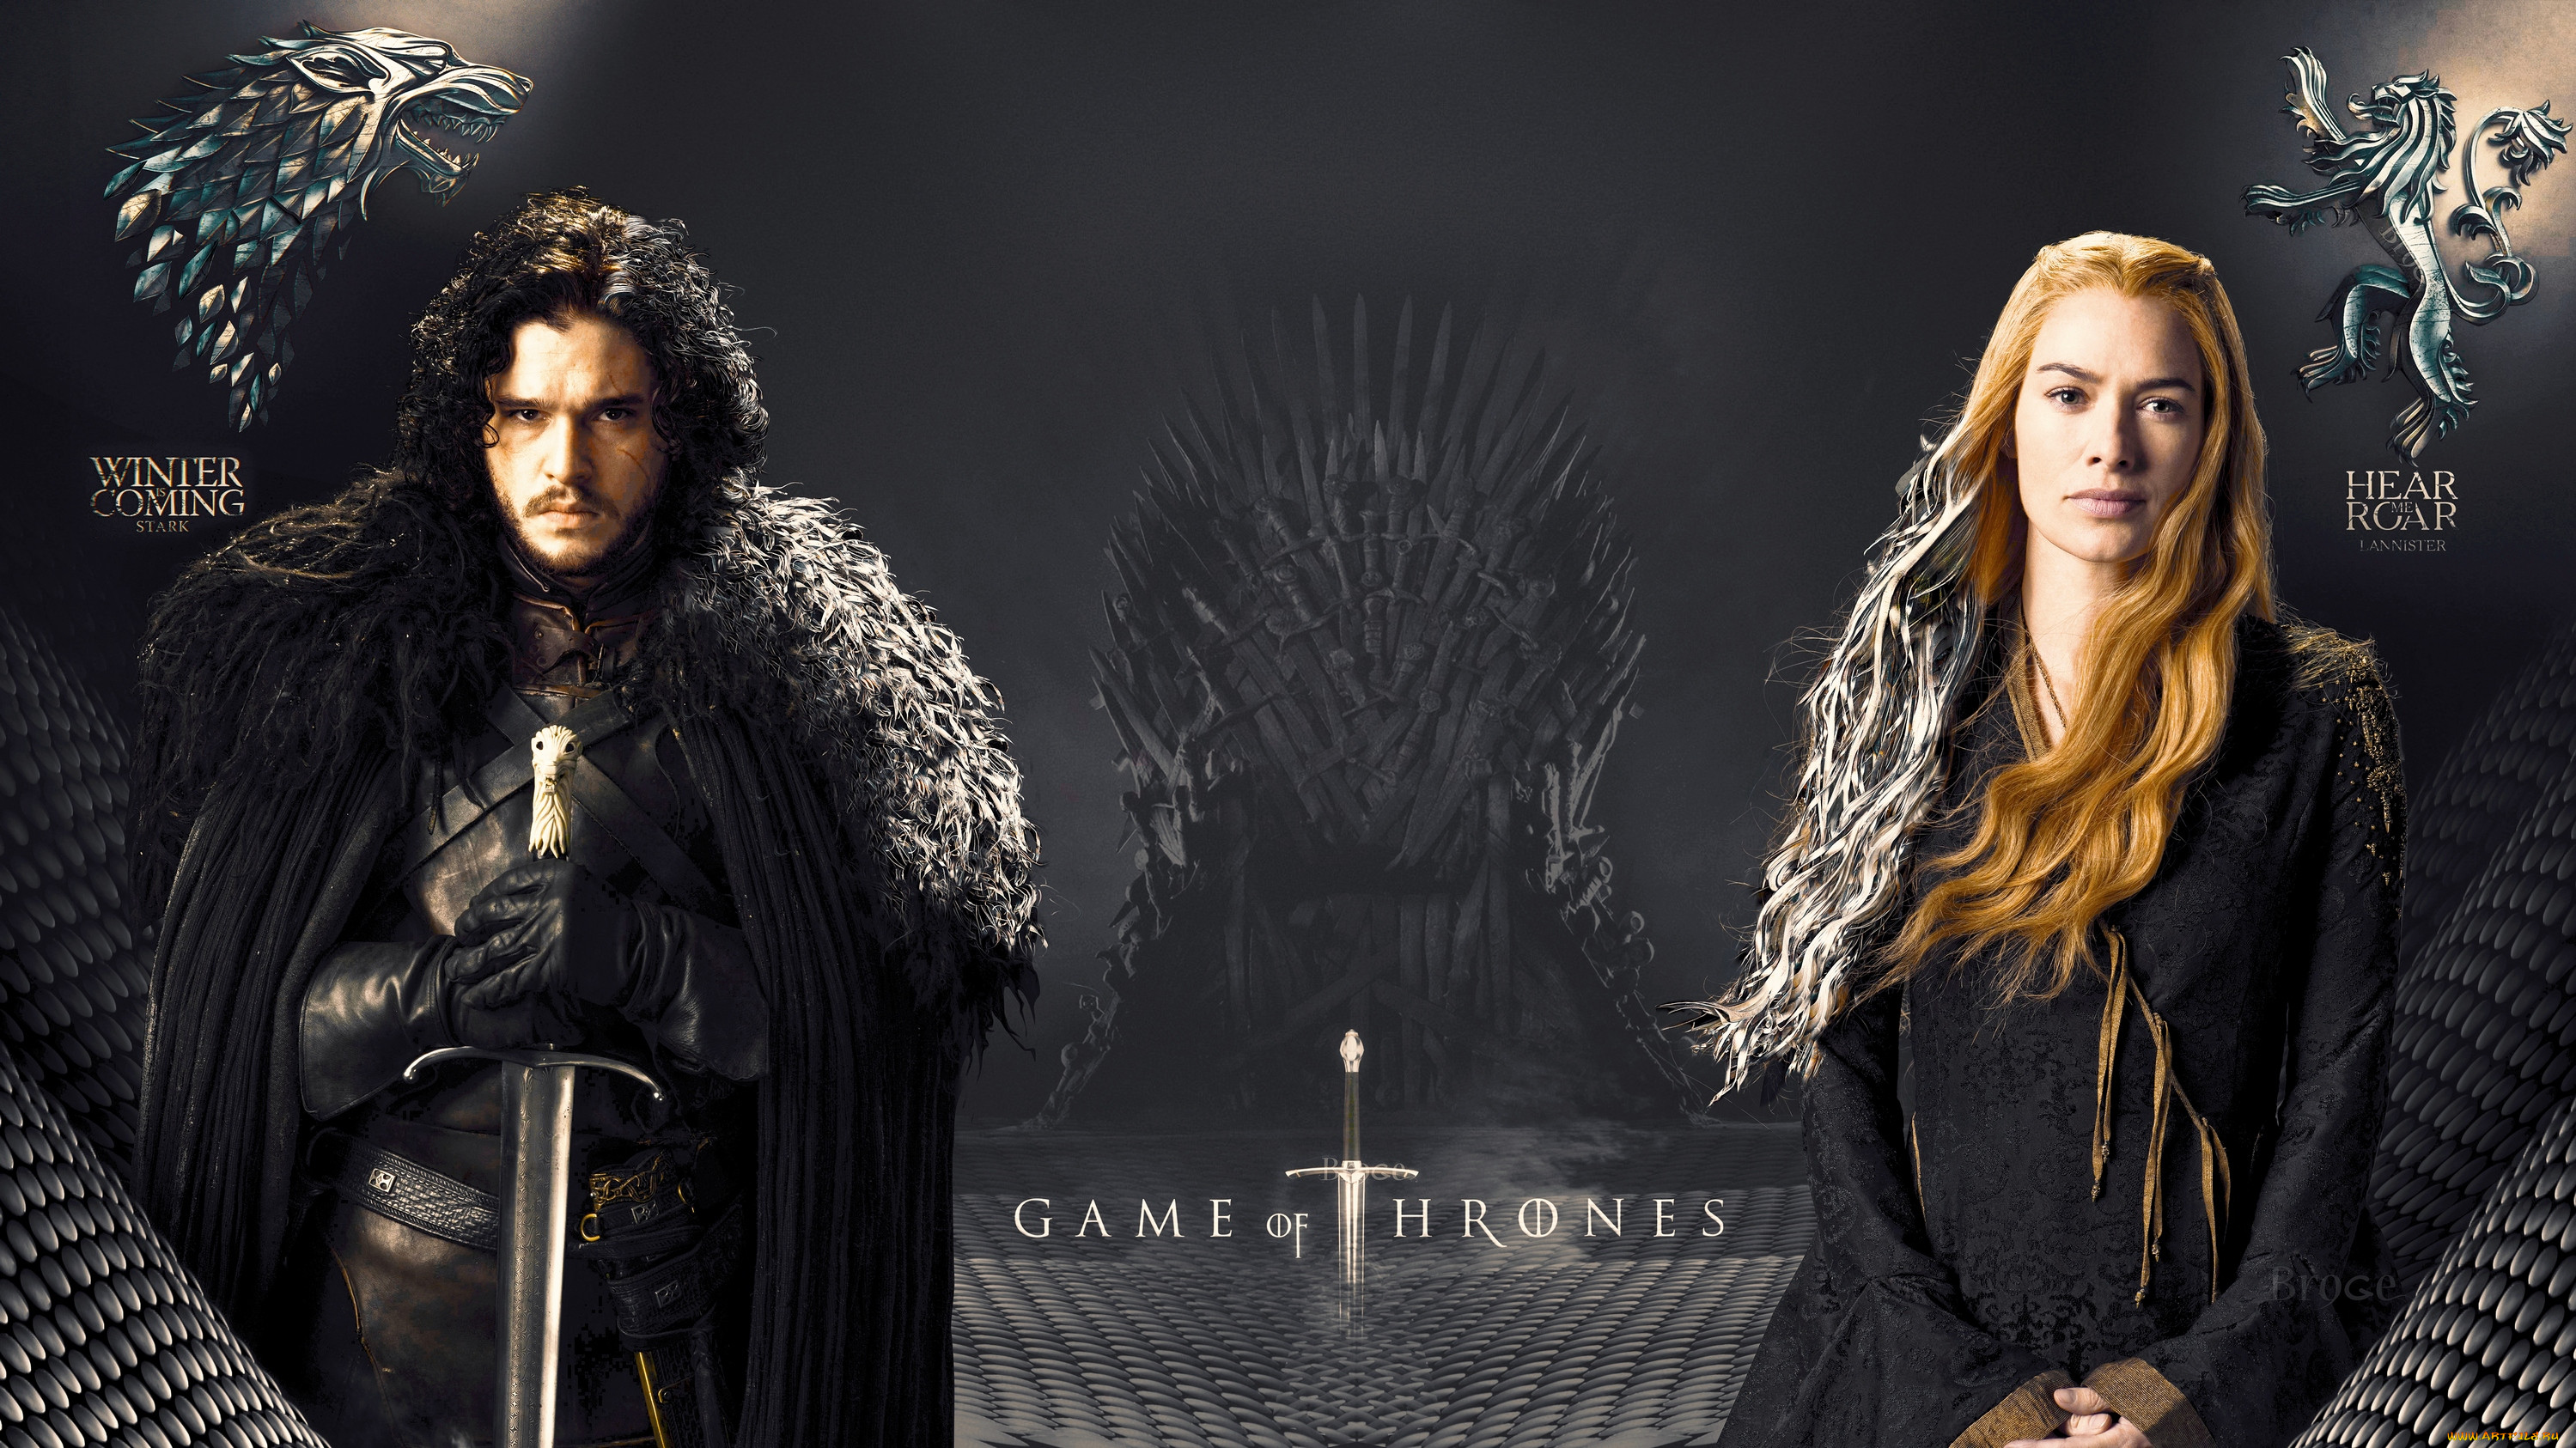  , game of thrones , , , , , , , game, of, thrones